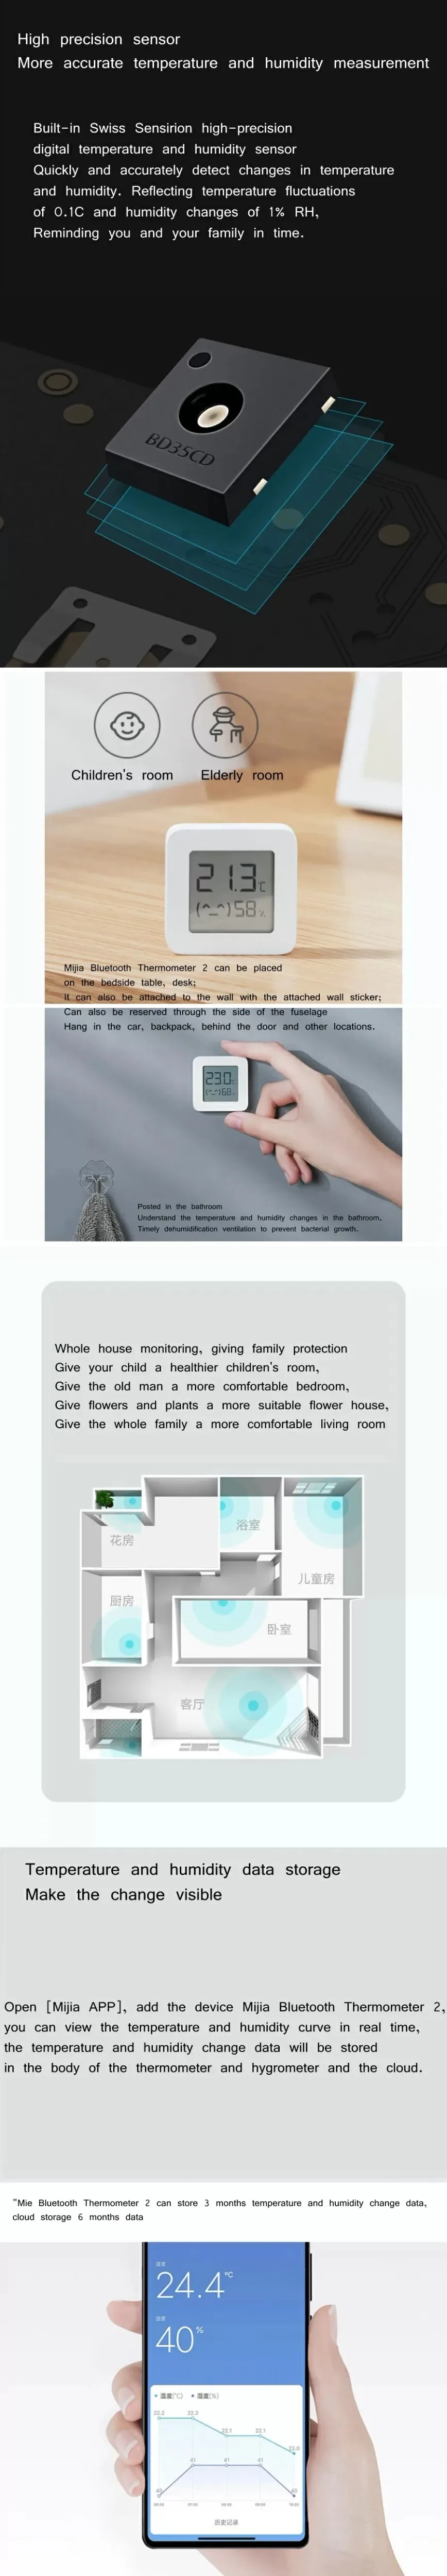 XIAOMI Mijia Bluetooth Thermometer 2 LCD Screen Moisture Compatible  Wireless Smart Temperature Humidity Sensor Without Battery